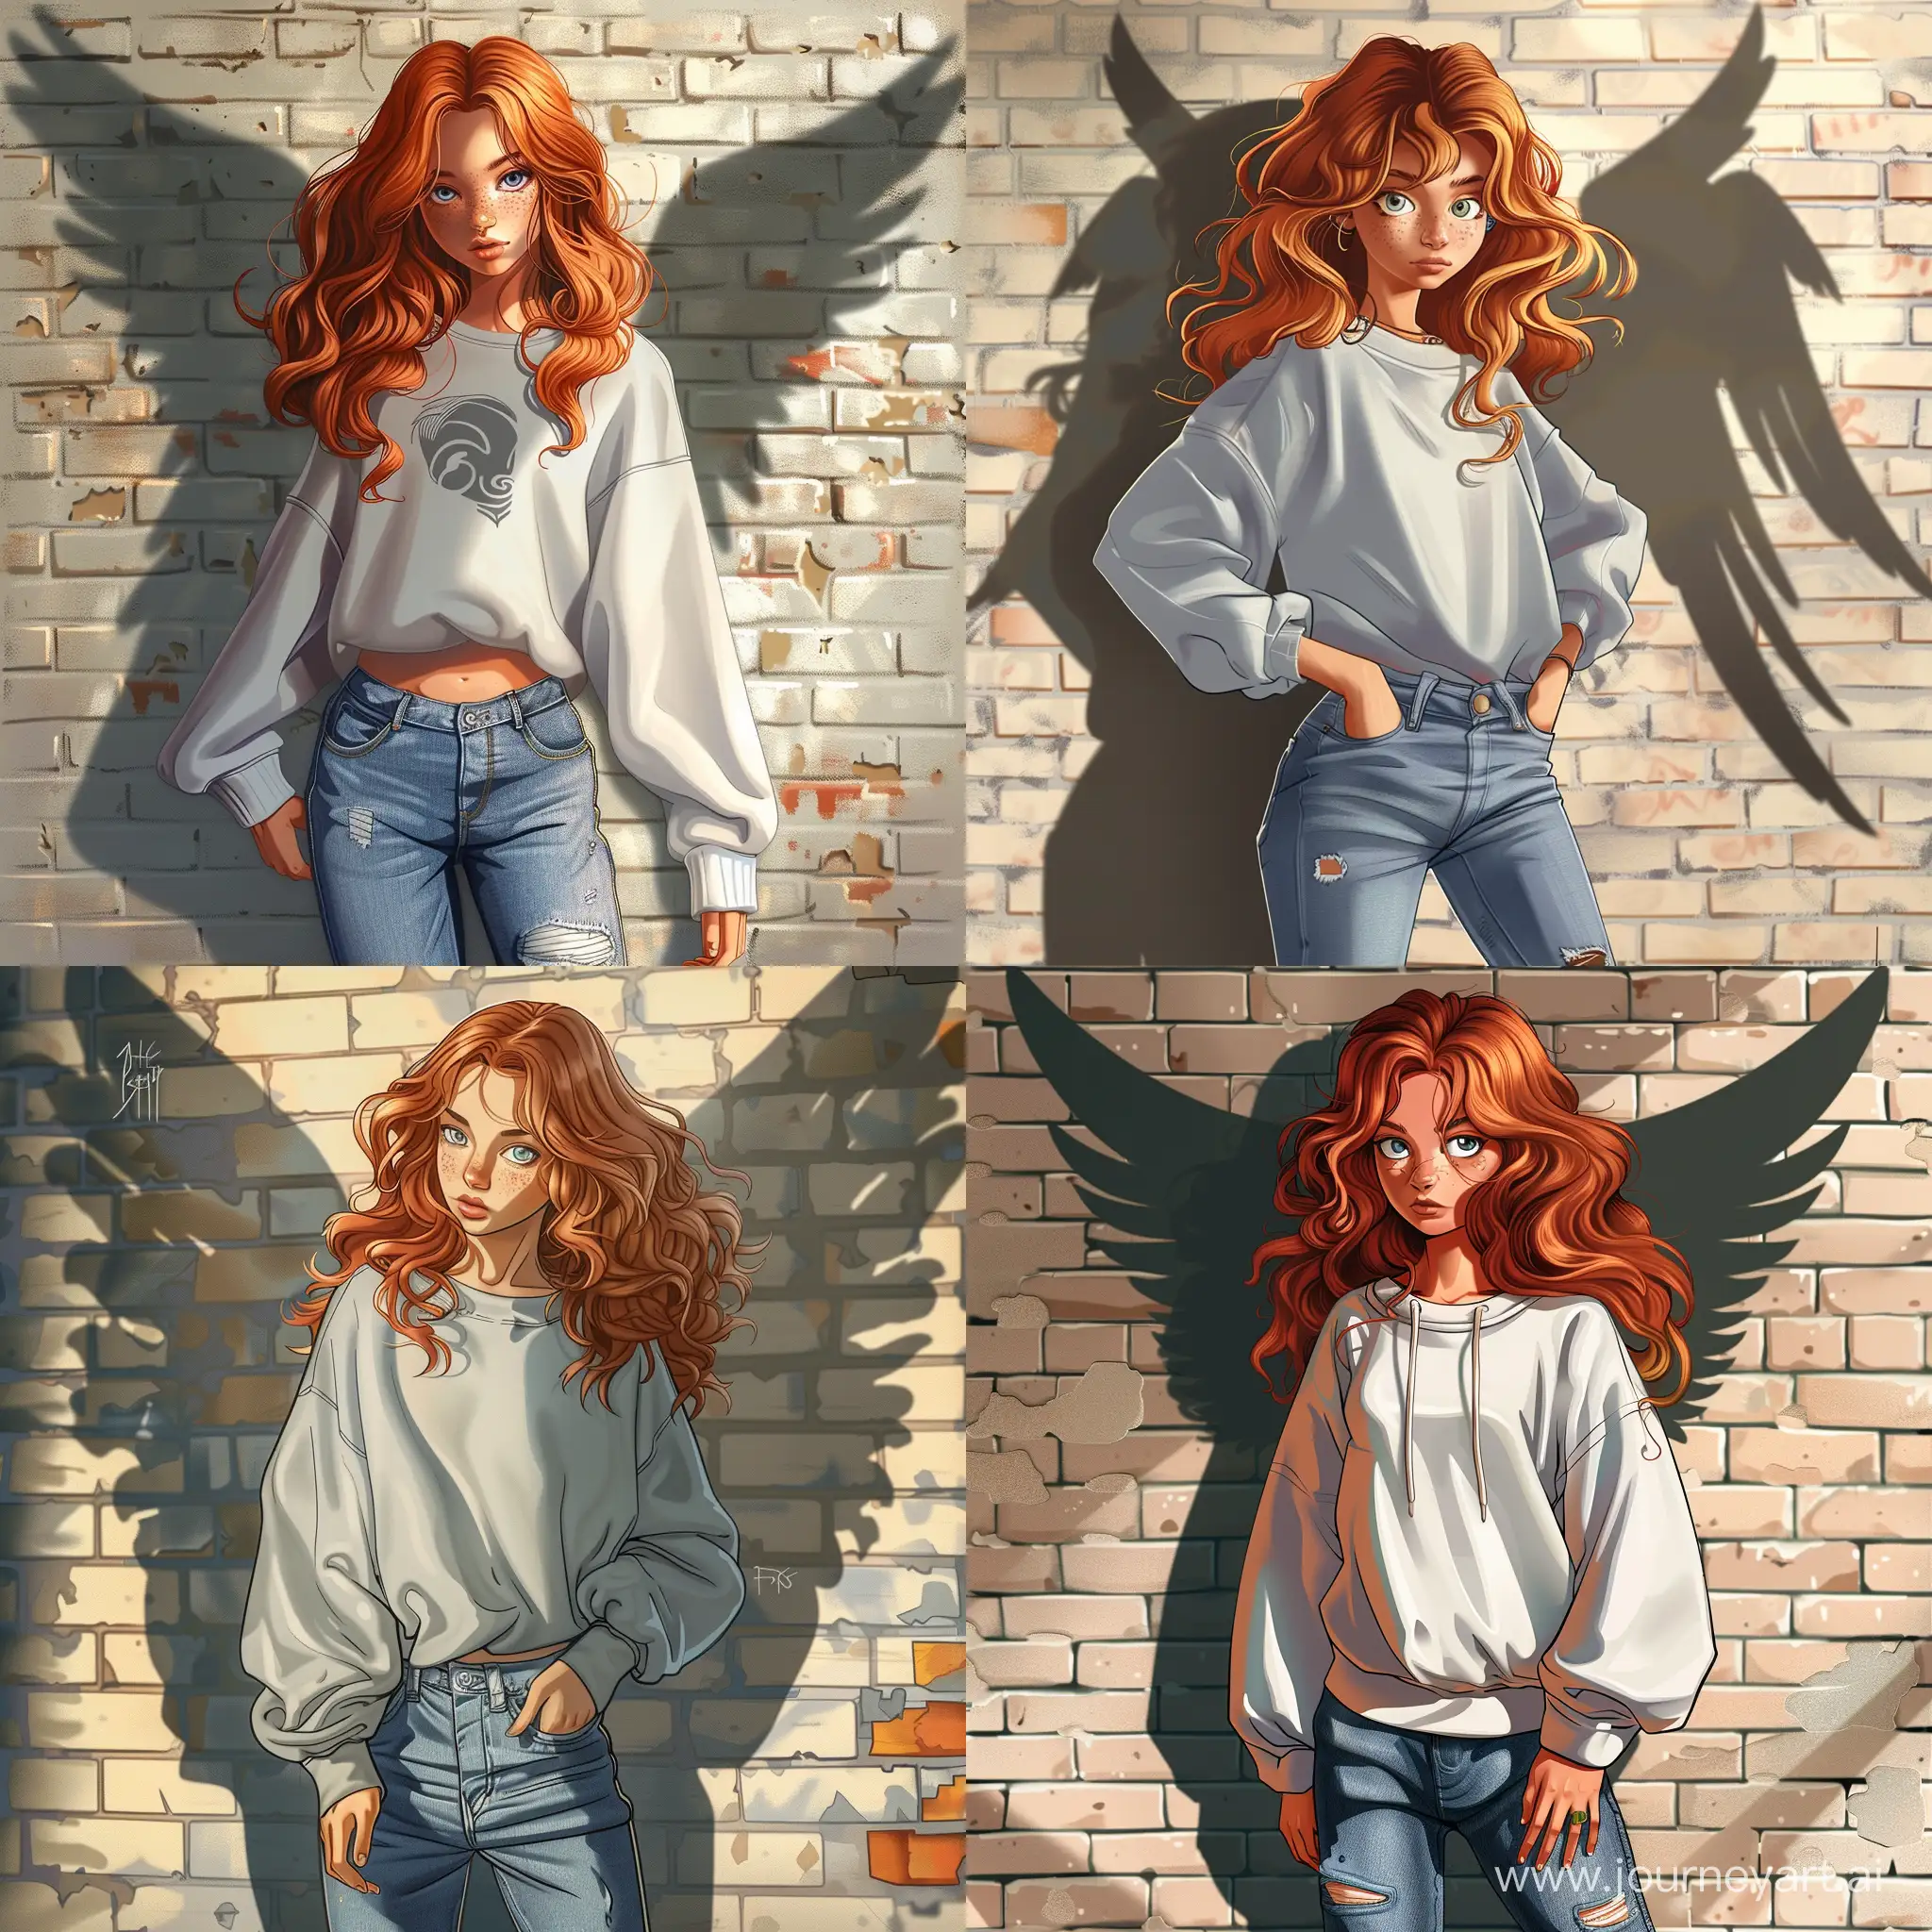 Teenage-Angel-with-Wavy-Red-Hair-in-Urban-Setting